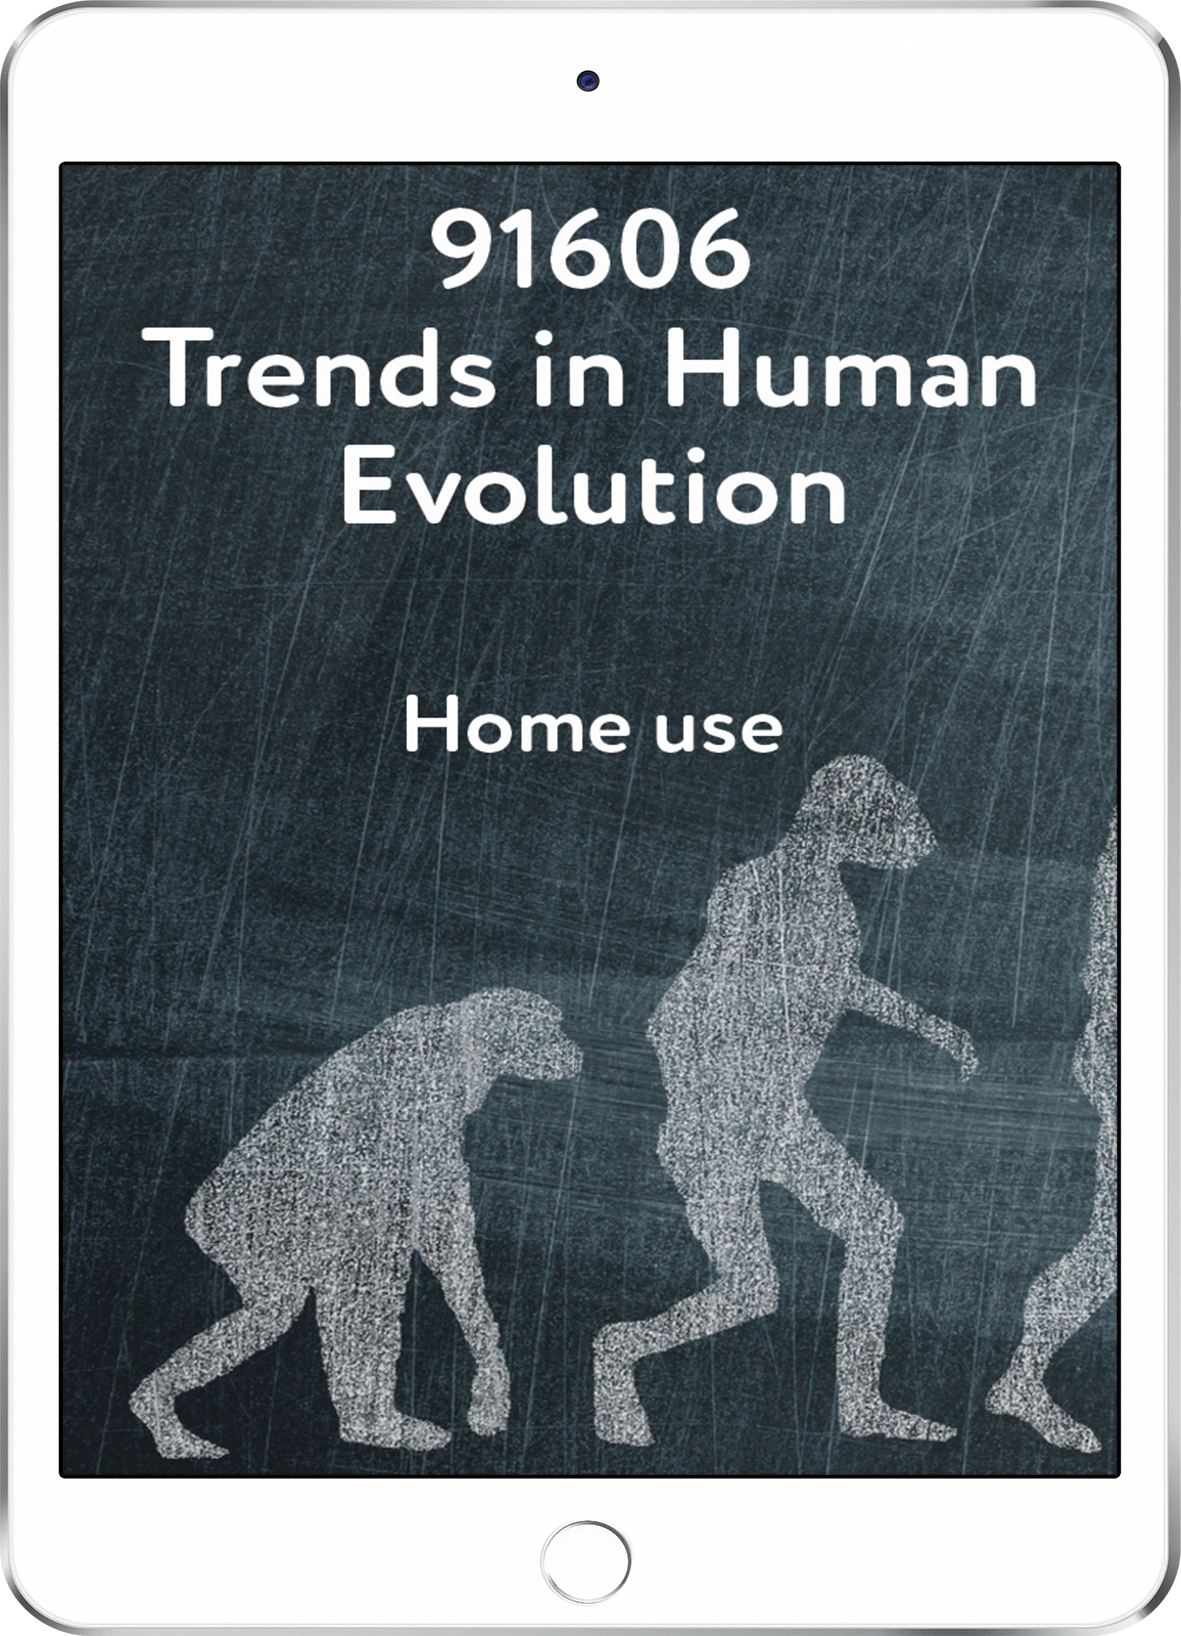 91606 Trends in Human Evolution - Home Use